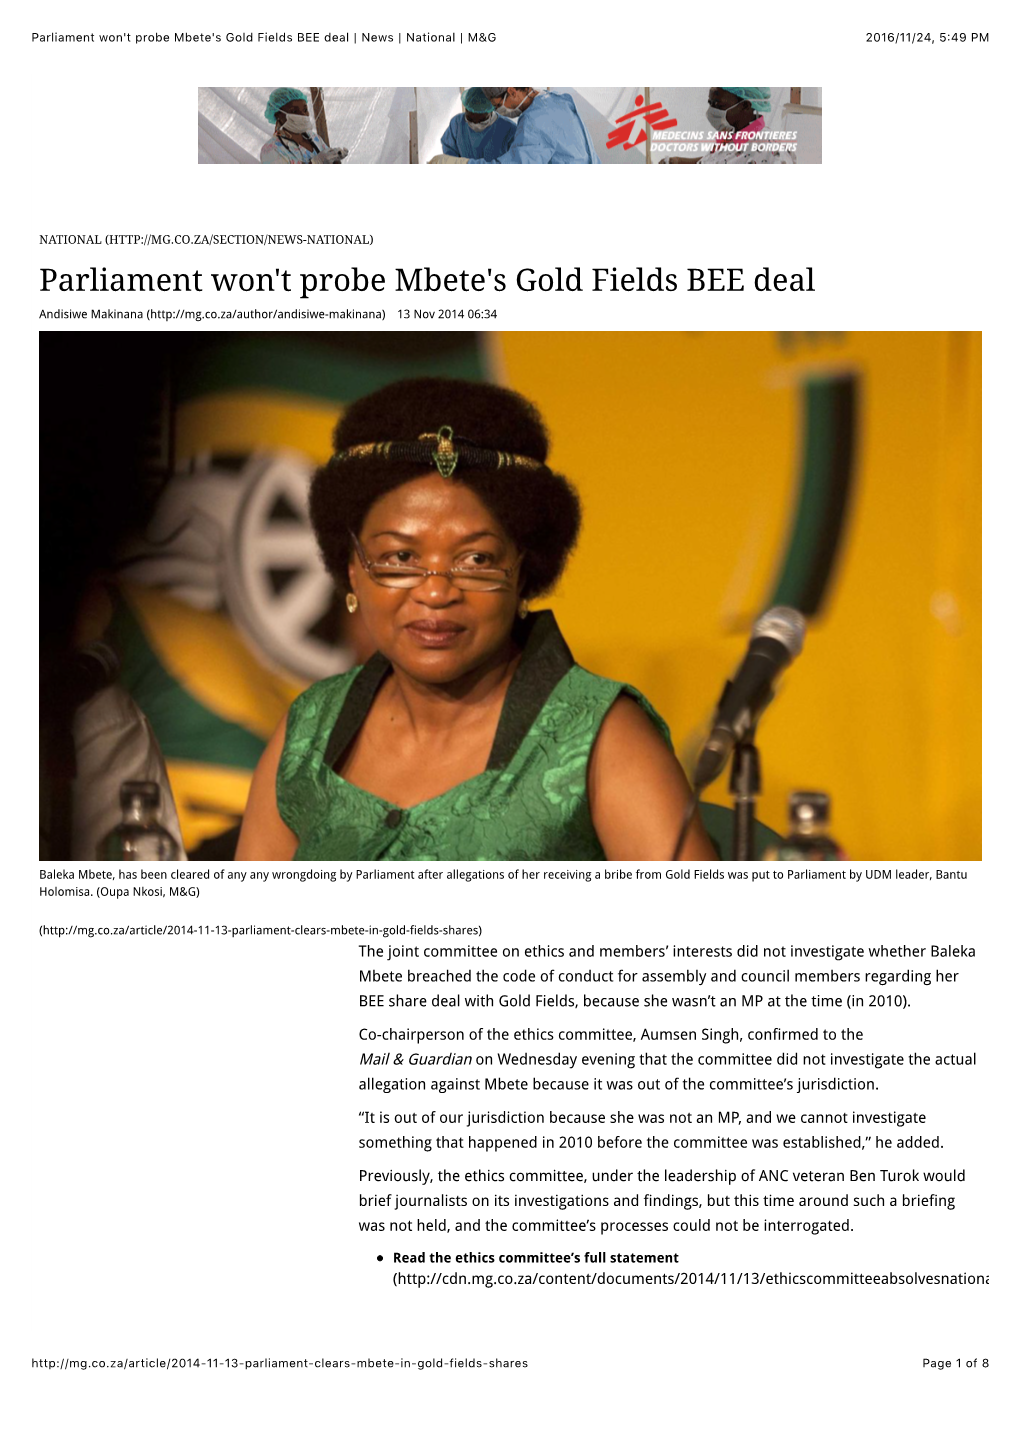 Parliament Won't Probe Mbete's Gold Fields BEE Deal | News | National | M&G 2016/11/24, 5�49 PM